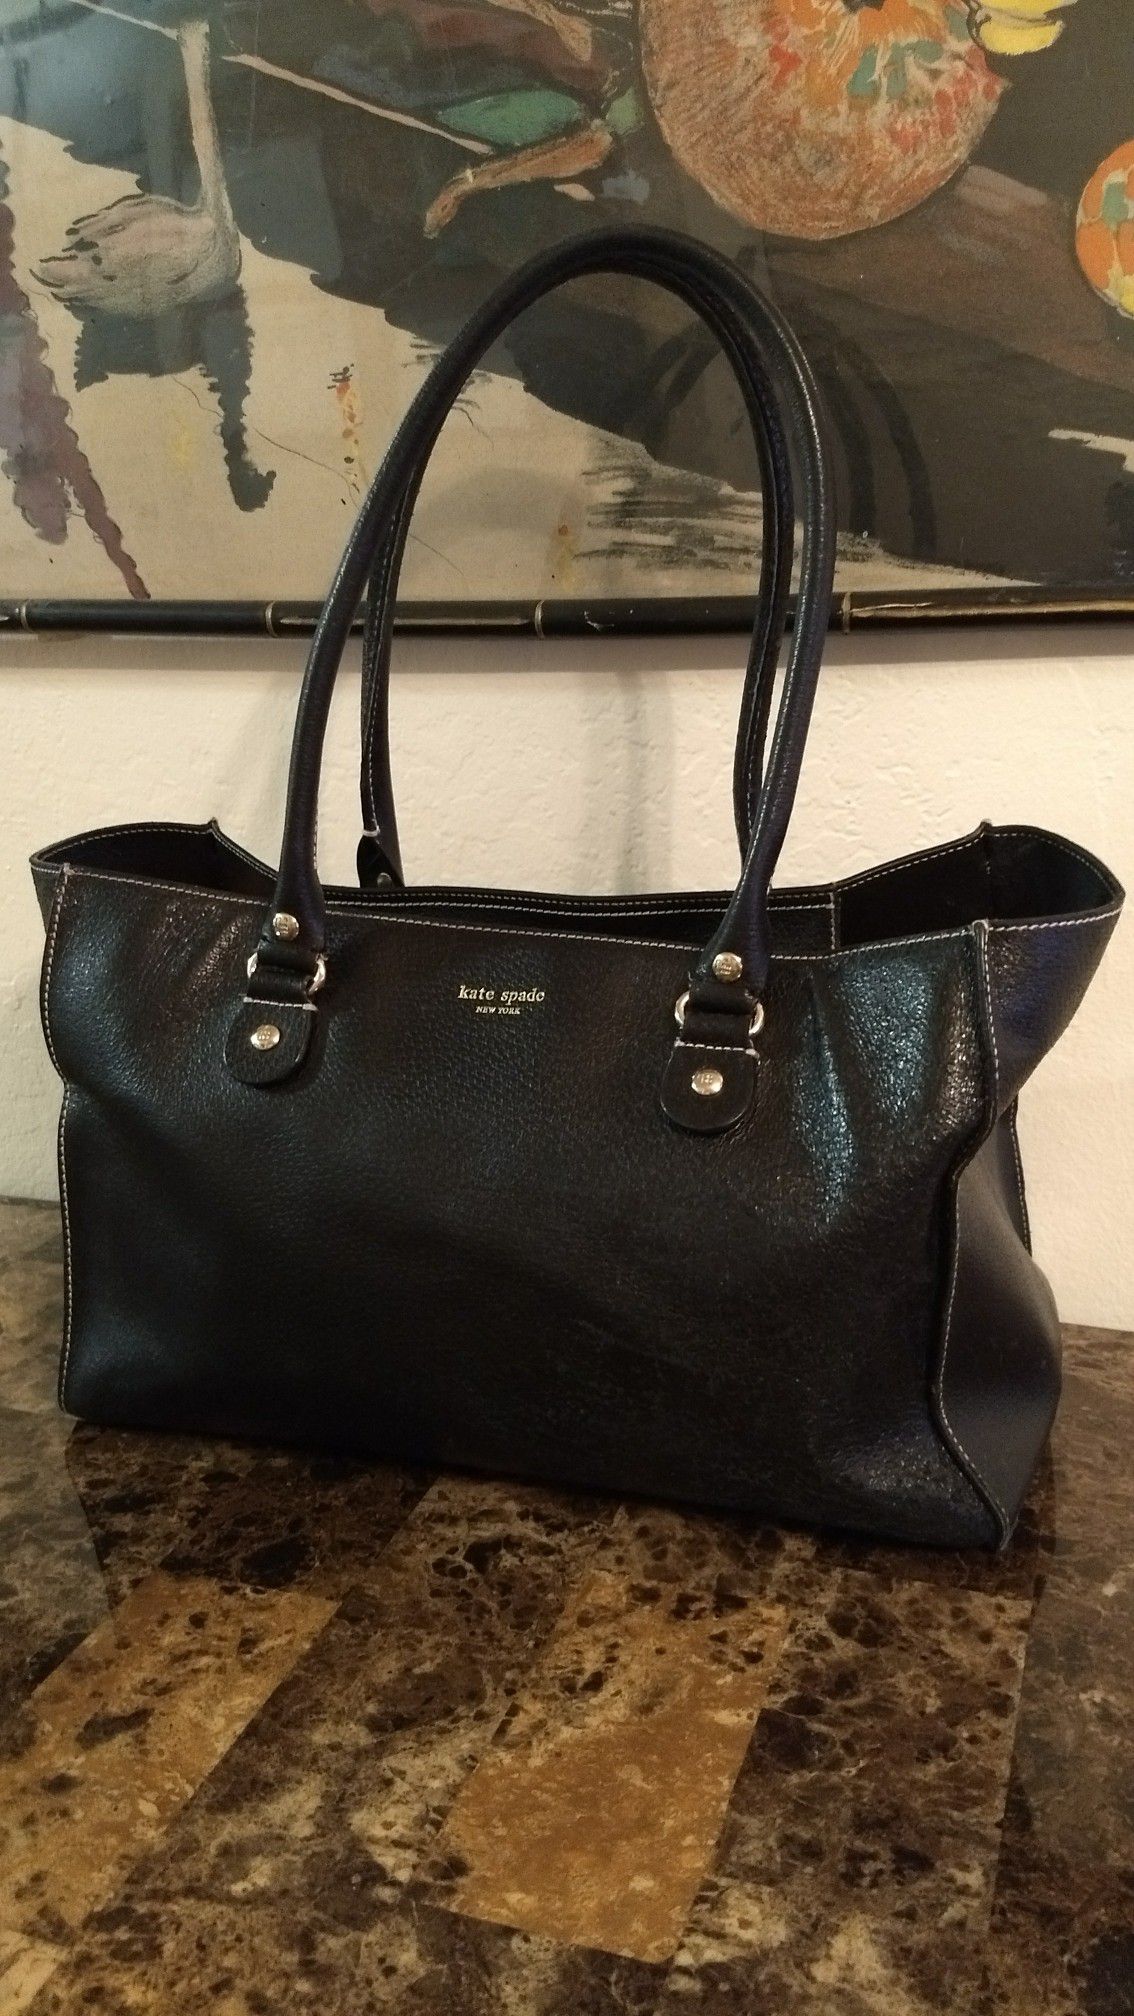 Kate Spade Jacquard Stripe Everything Large Tote for Sale in Ann Arbor, MI  - OfferUp